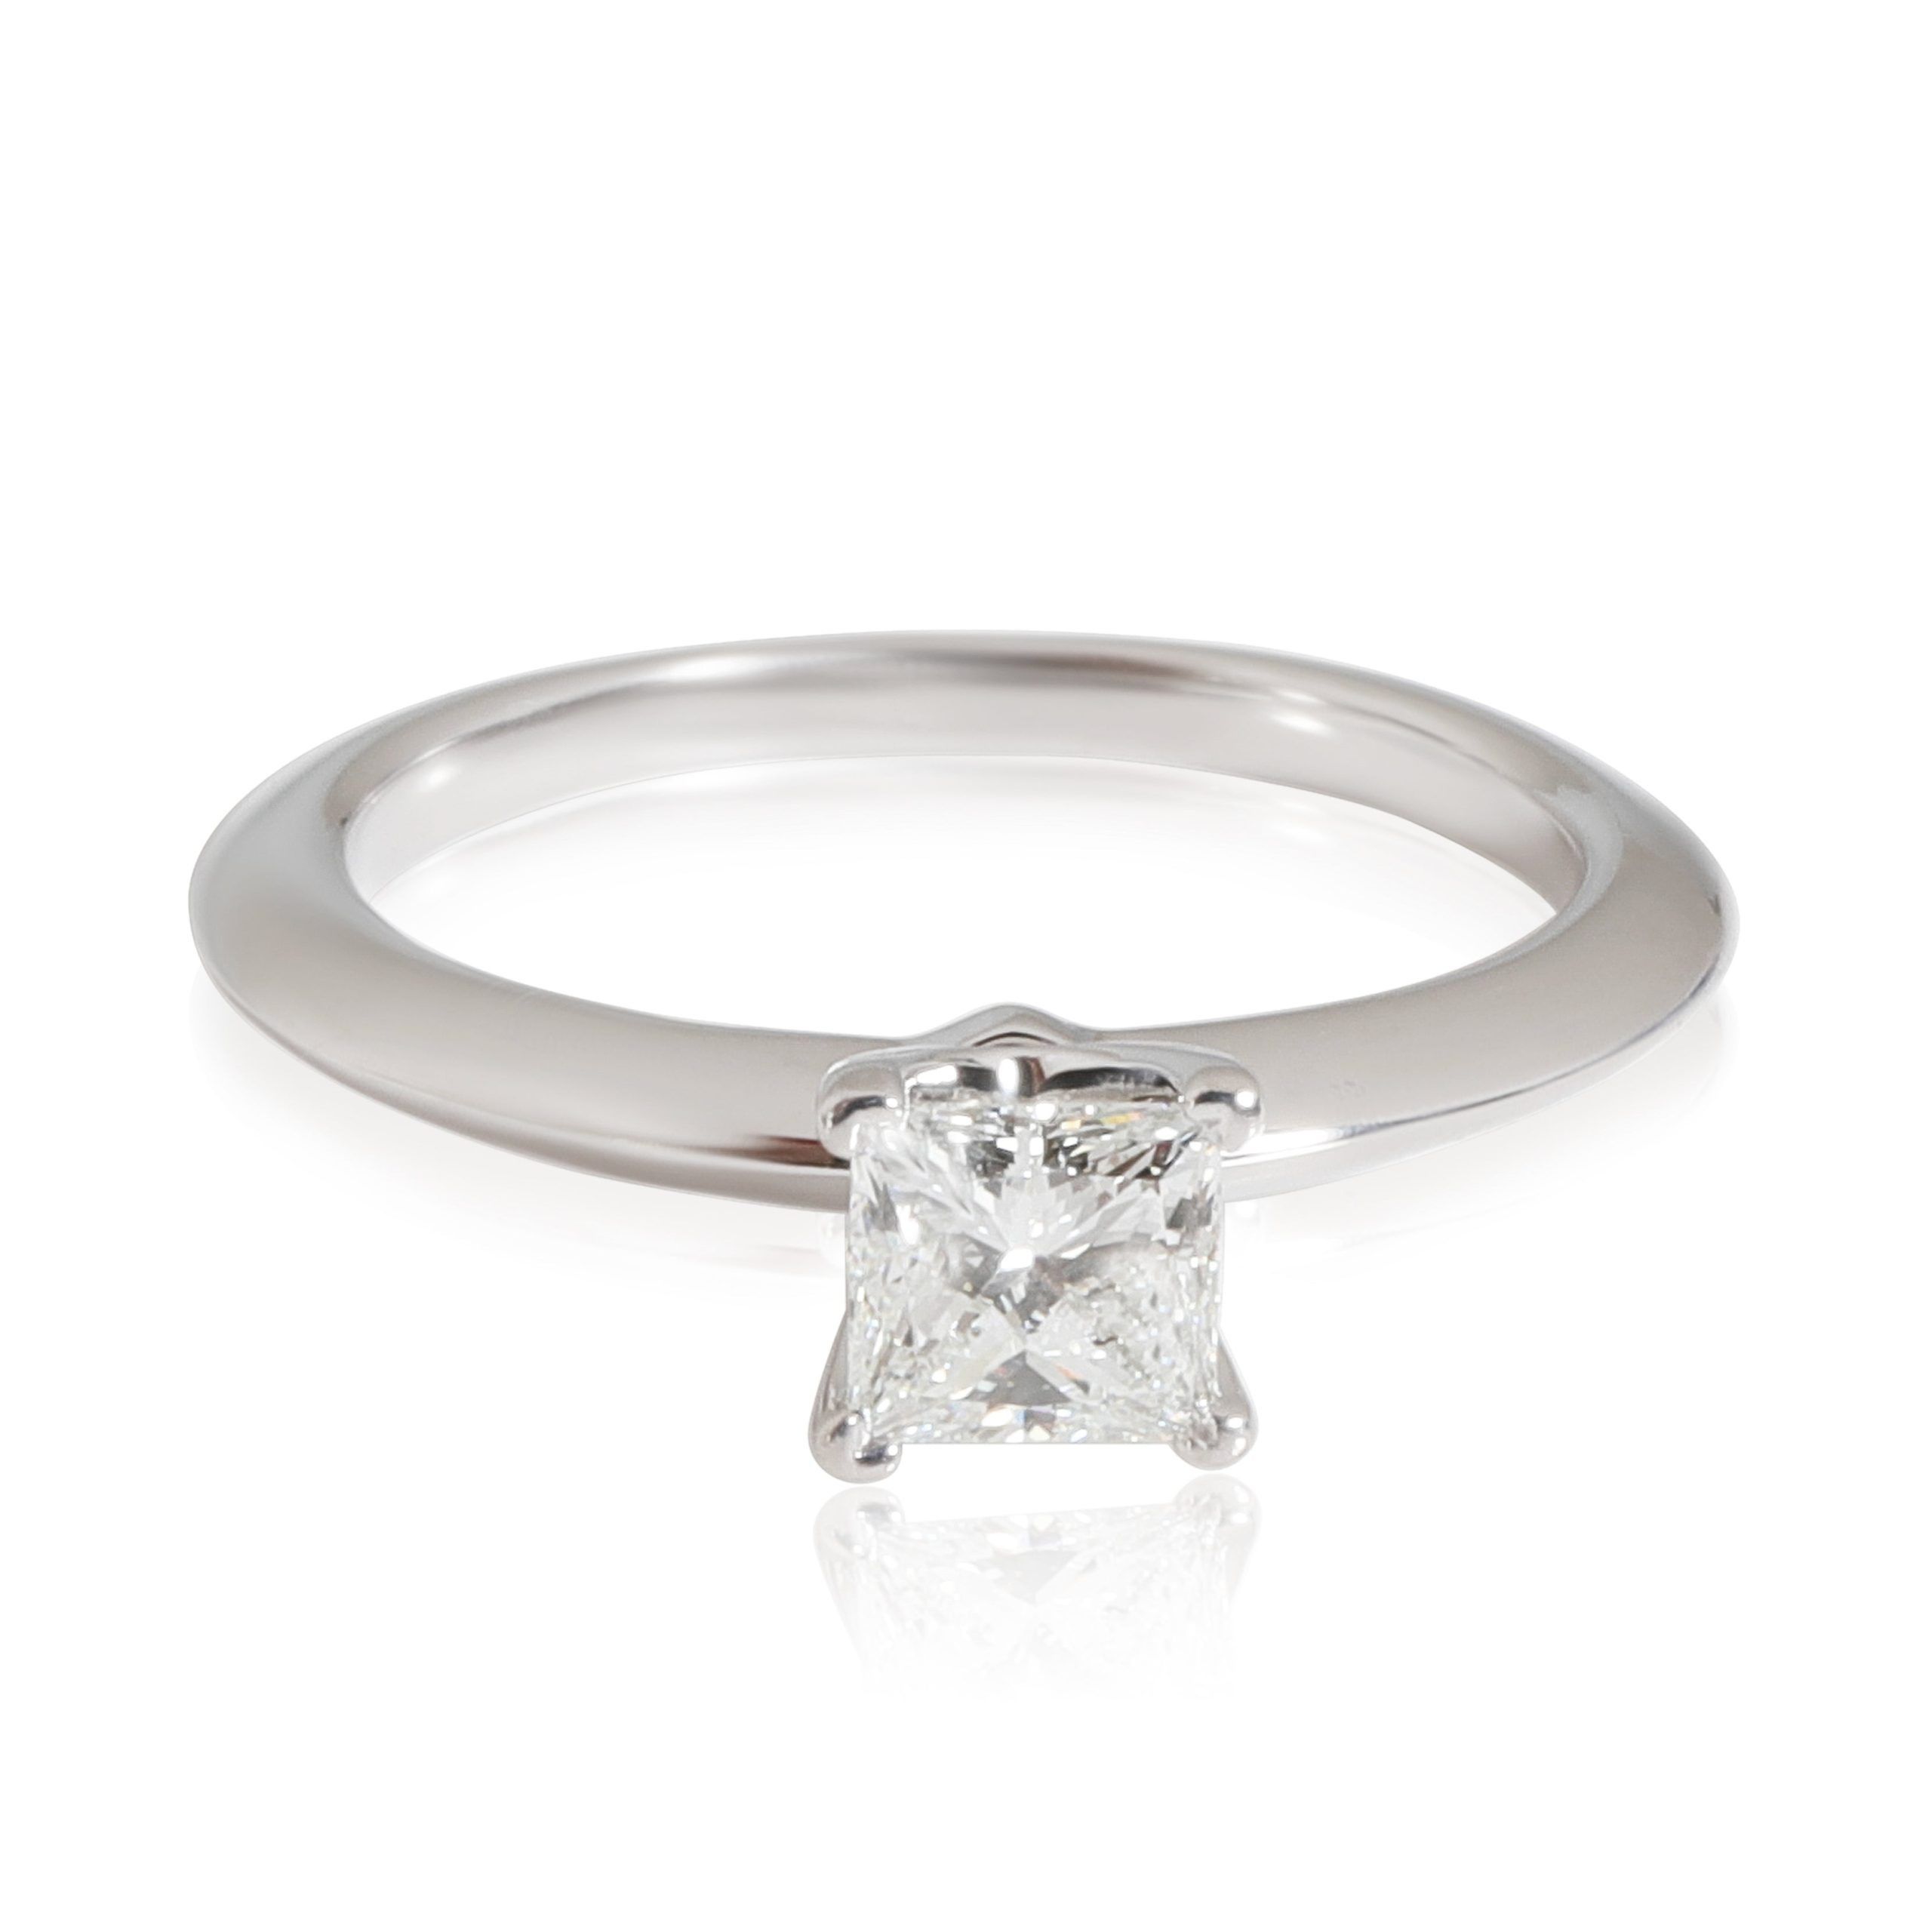 Tiffany & Co. Tiffany & Co. Diamond Engagement Ring in Platinum I VS2 0.40 CTW Size ONE SIZE - 1 Preview